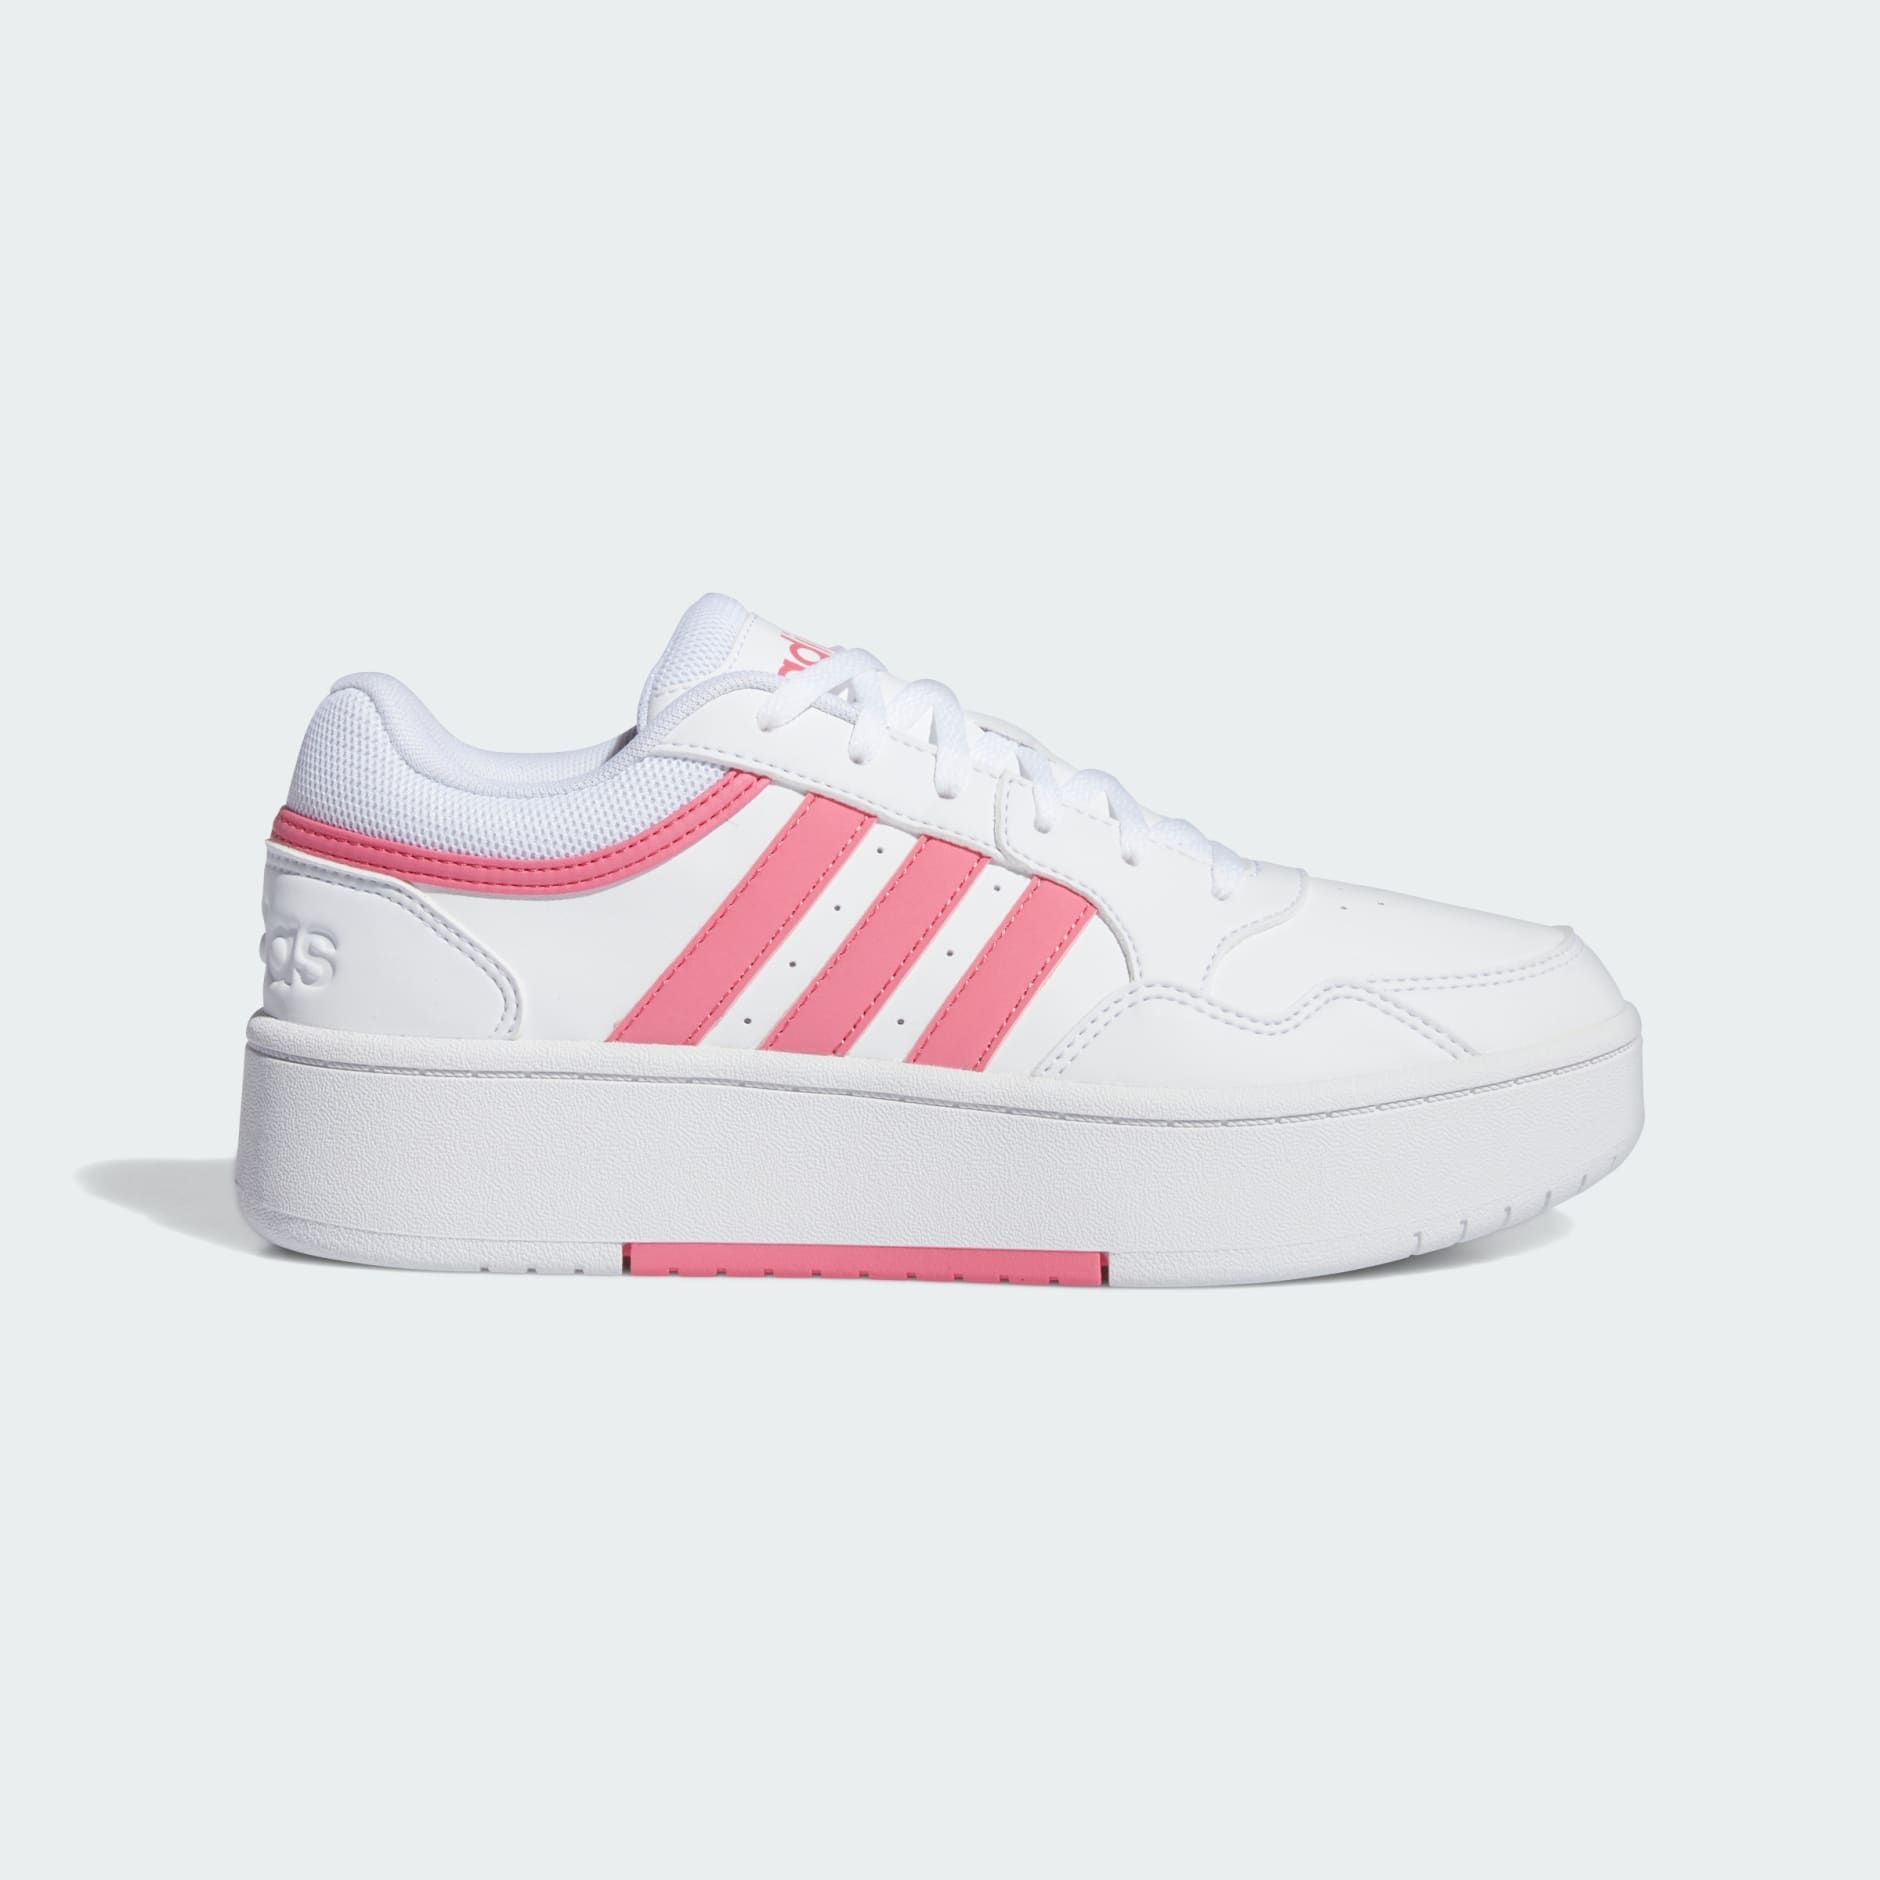  adidas Hoops 3.0 Bold - White / Pink Fusion 